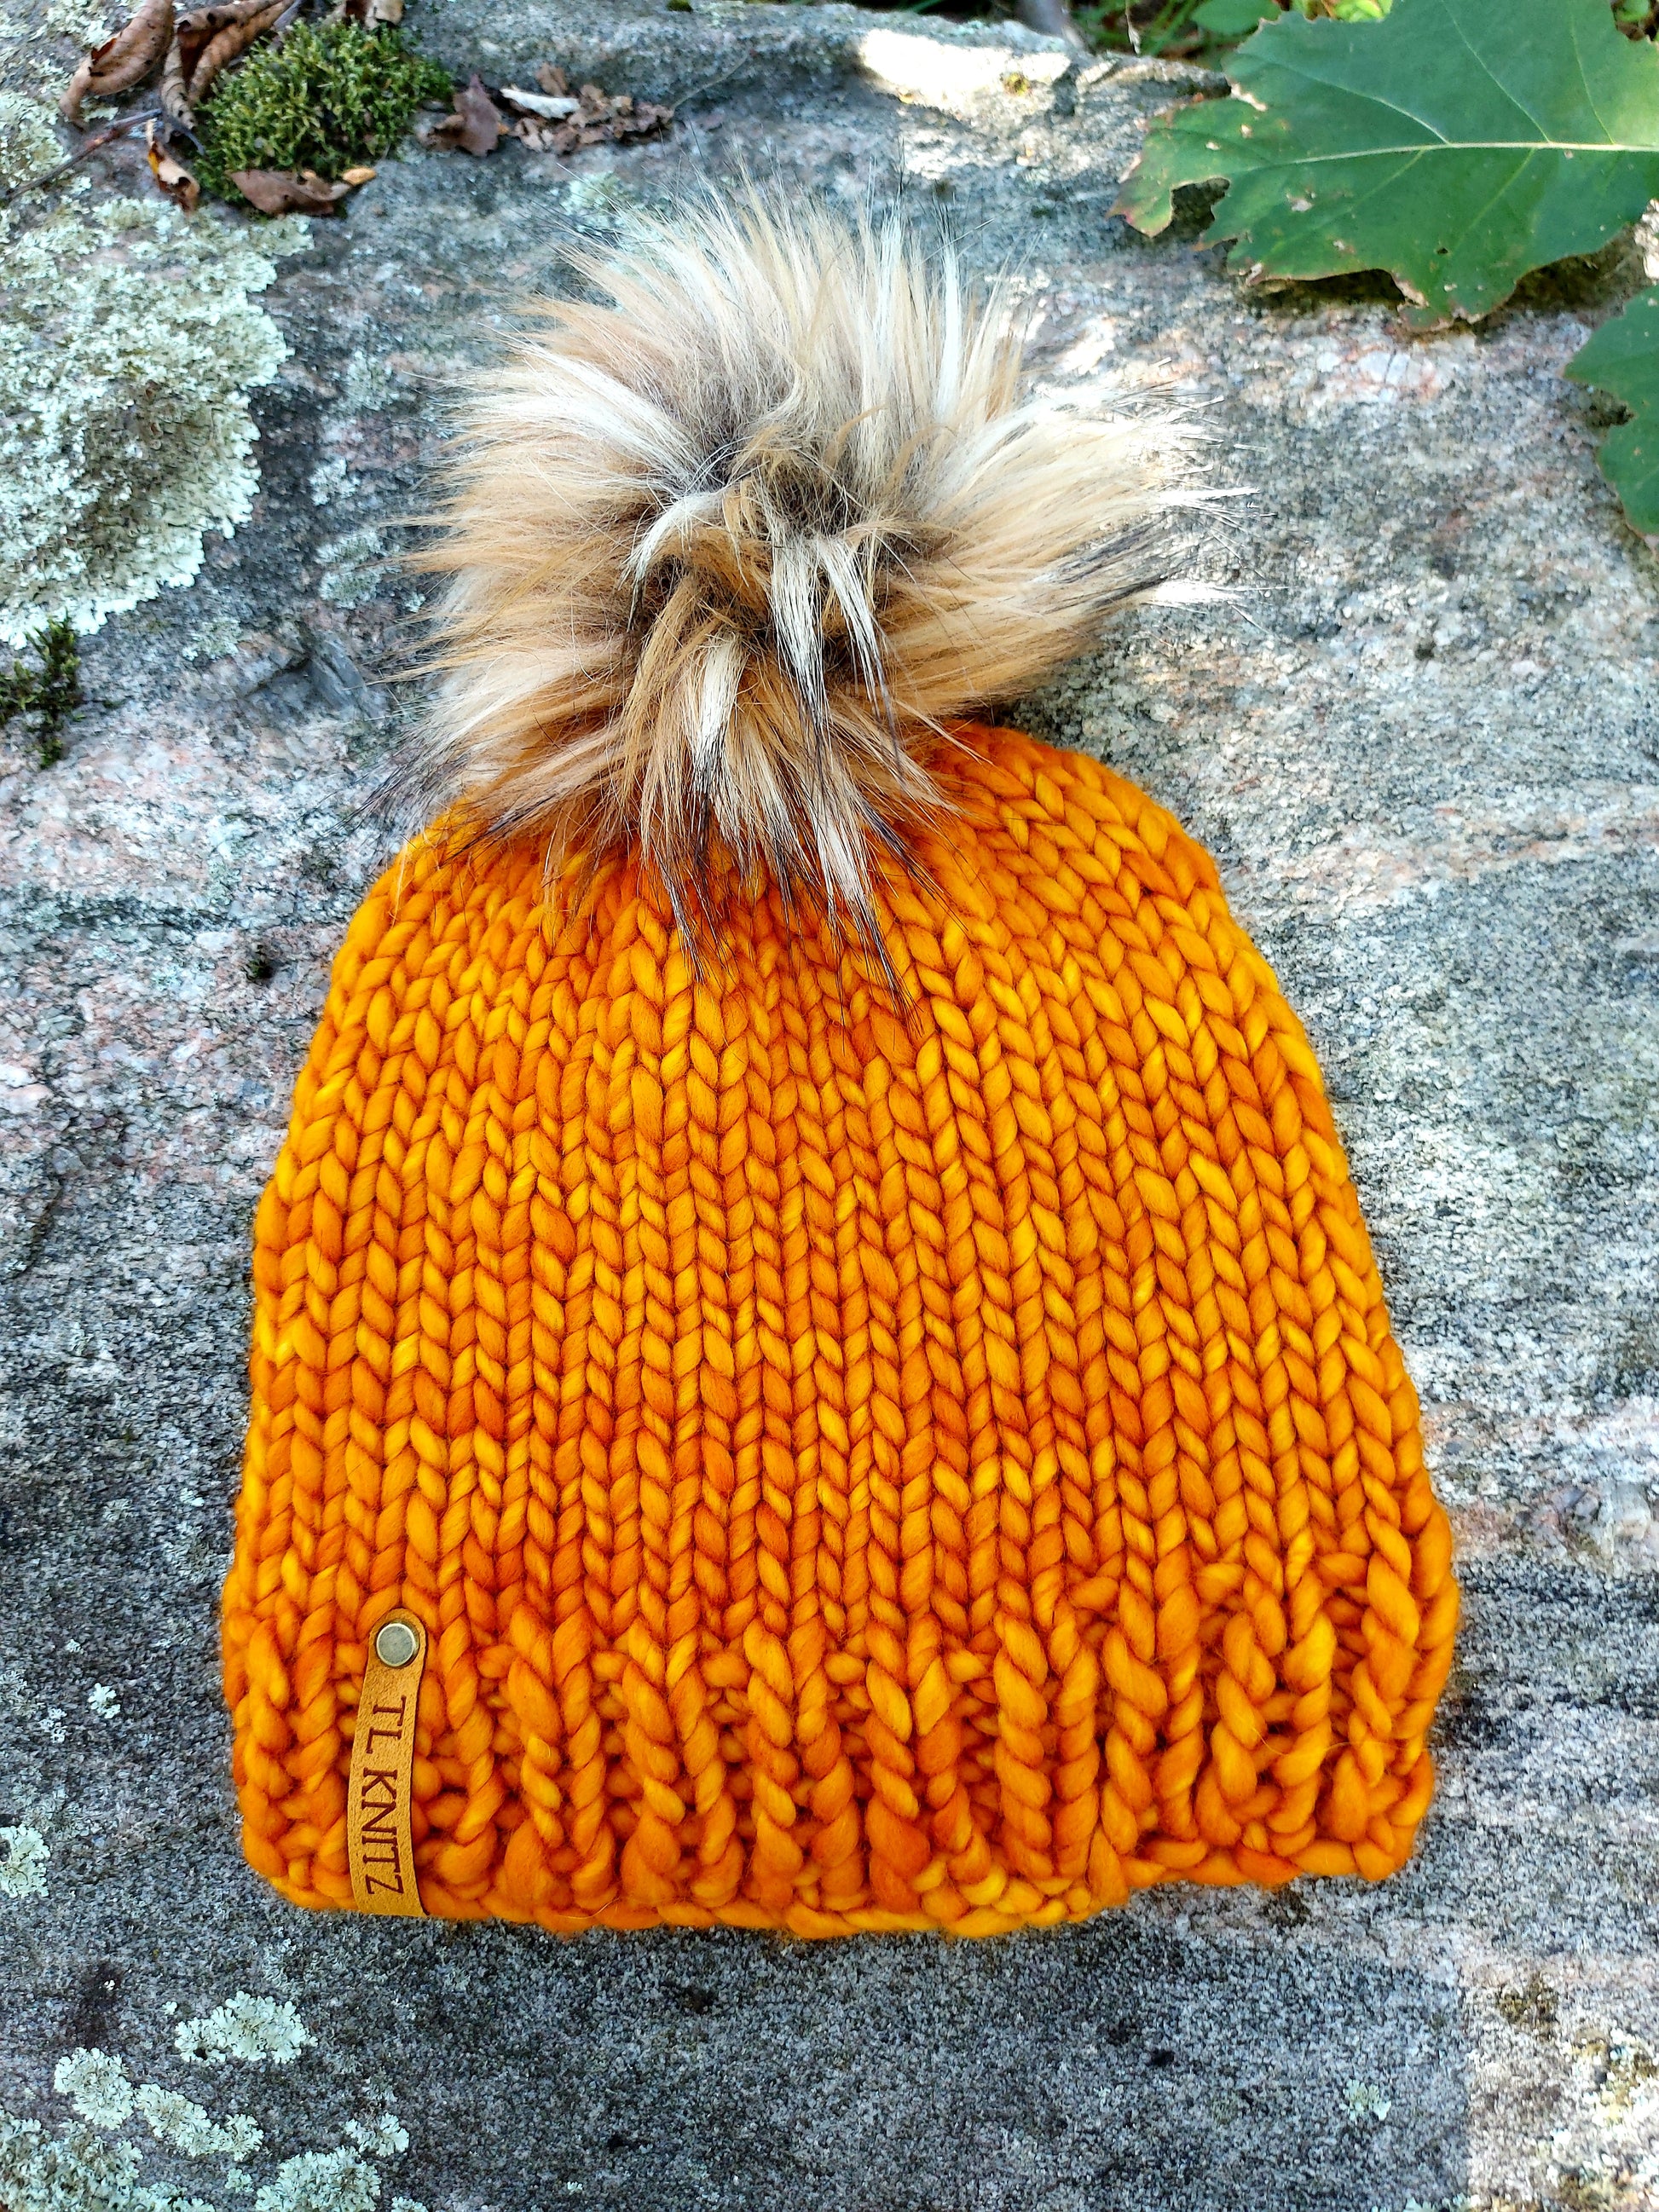 Autumn Knit Cozy Beanie, Sweet Fall Hats From Spool No. 72